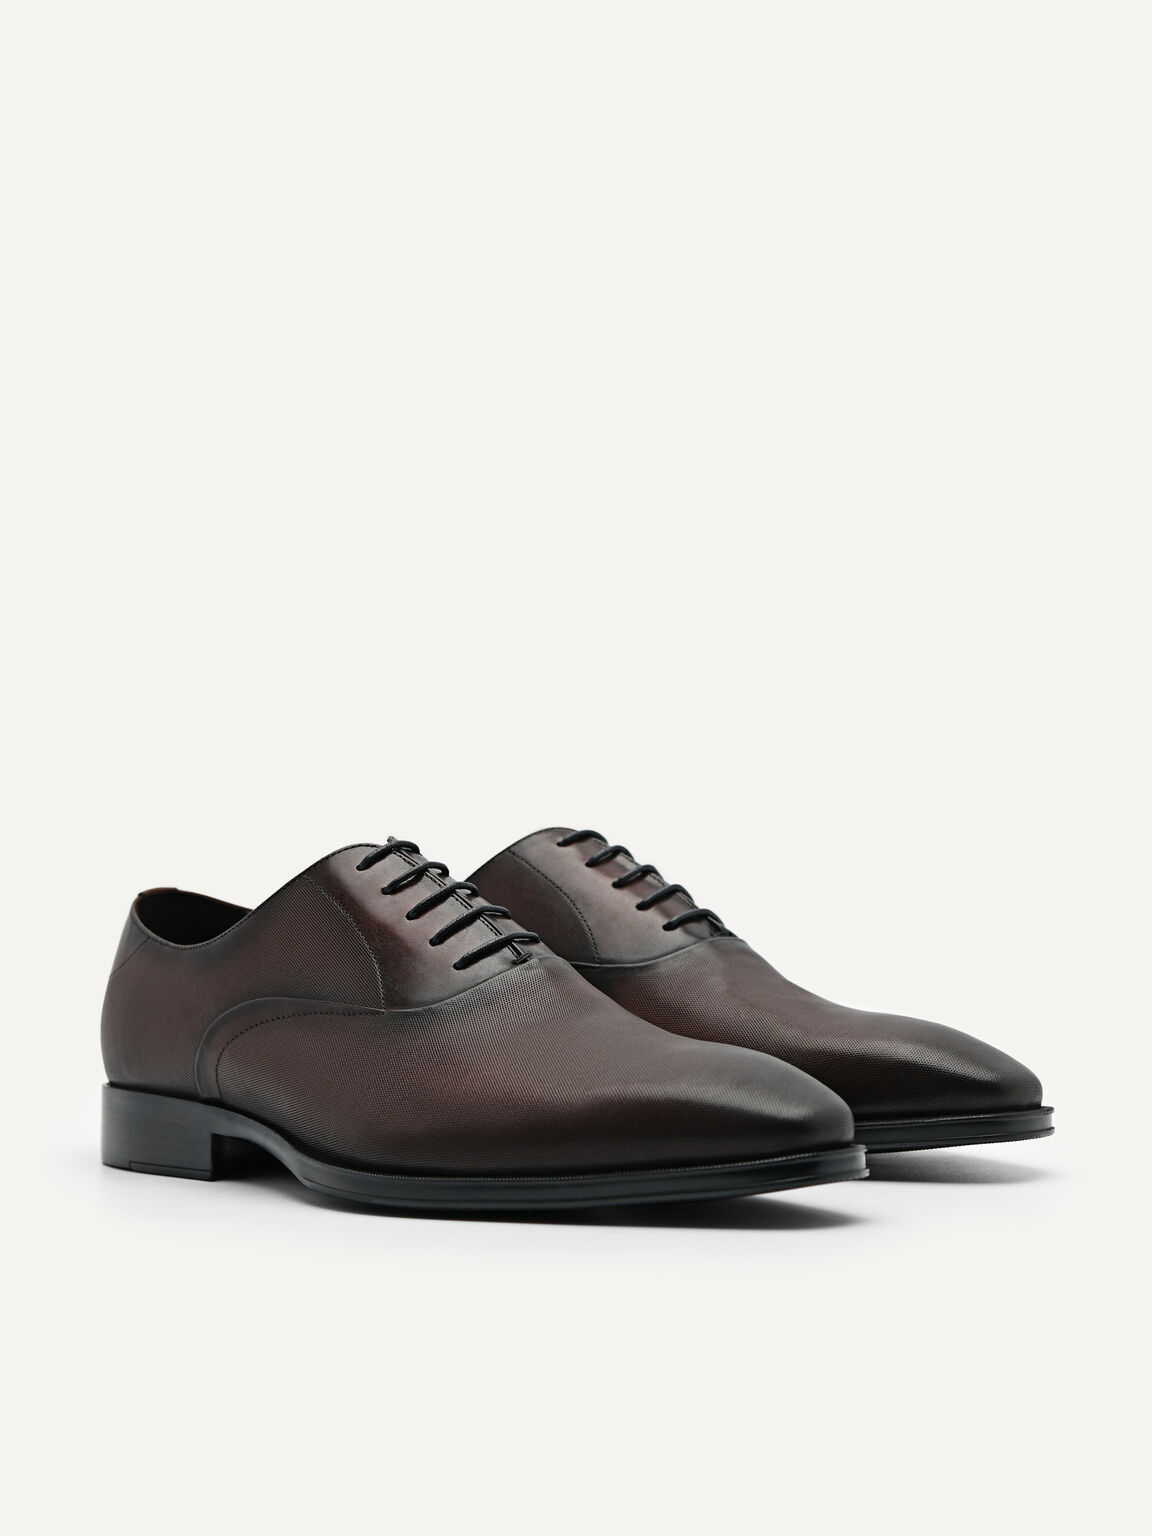 Holly Leather Oxford Shoes, Dark Brown, hi-res